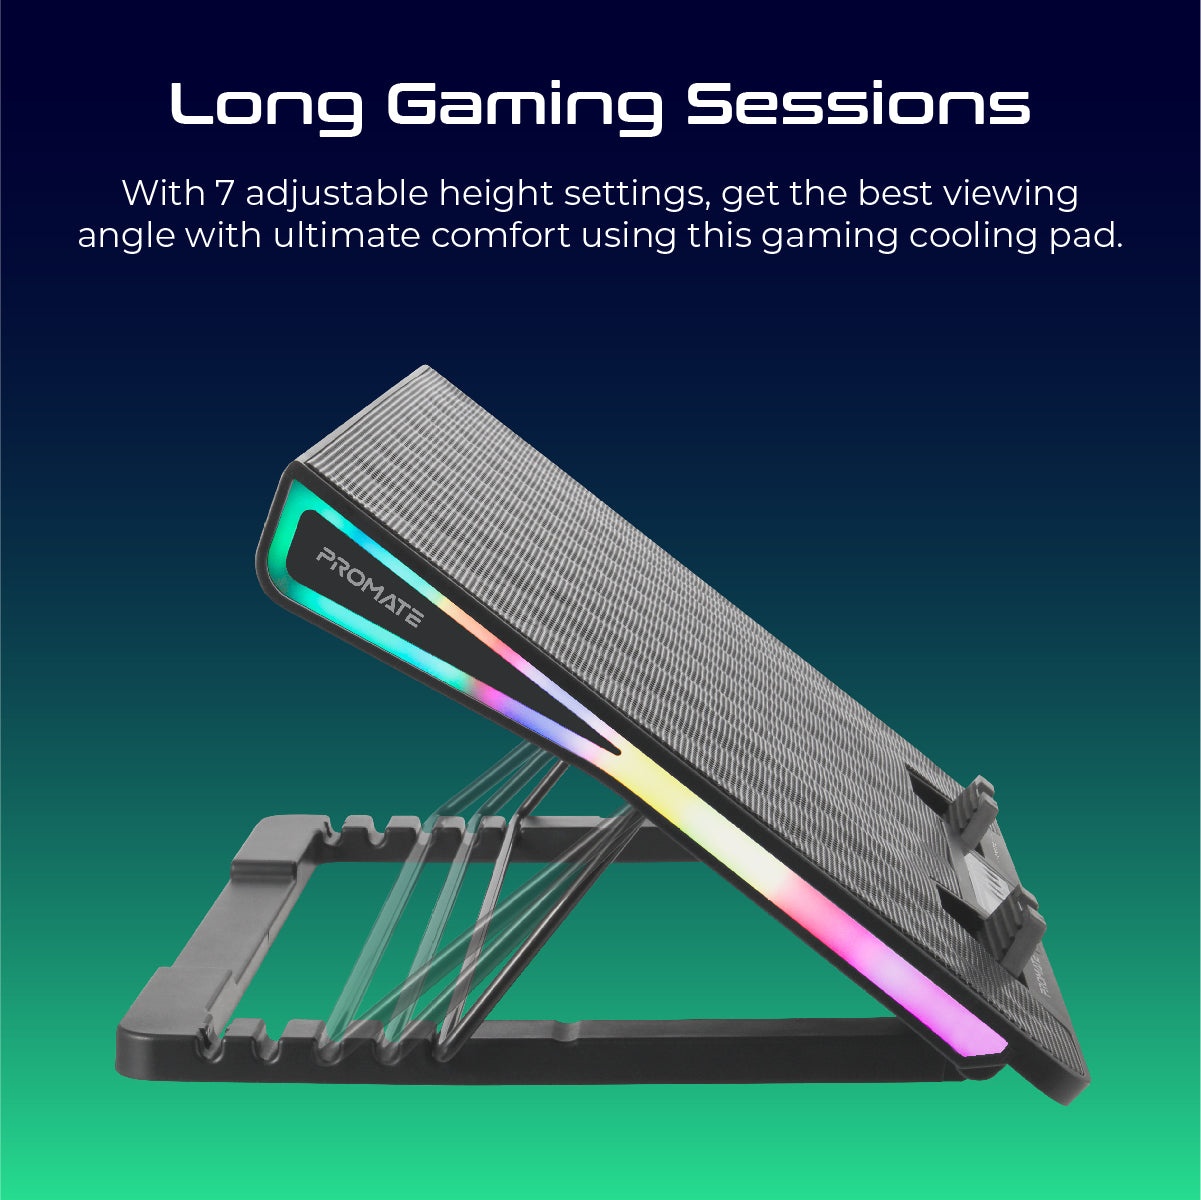 Portable Height Adjustable RGB Gaming Cooling Pad